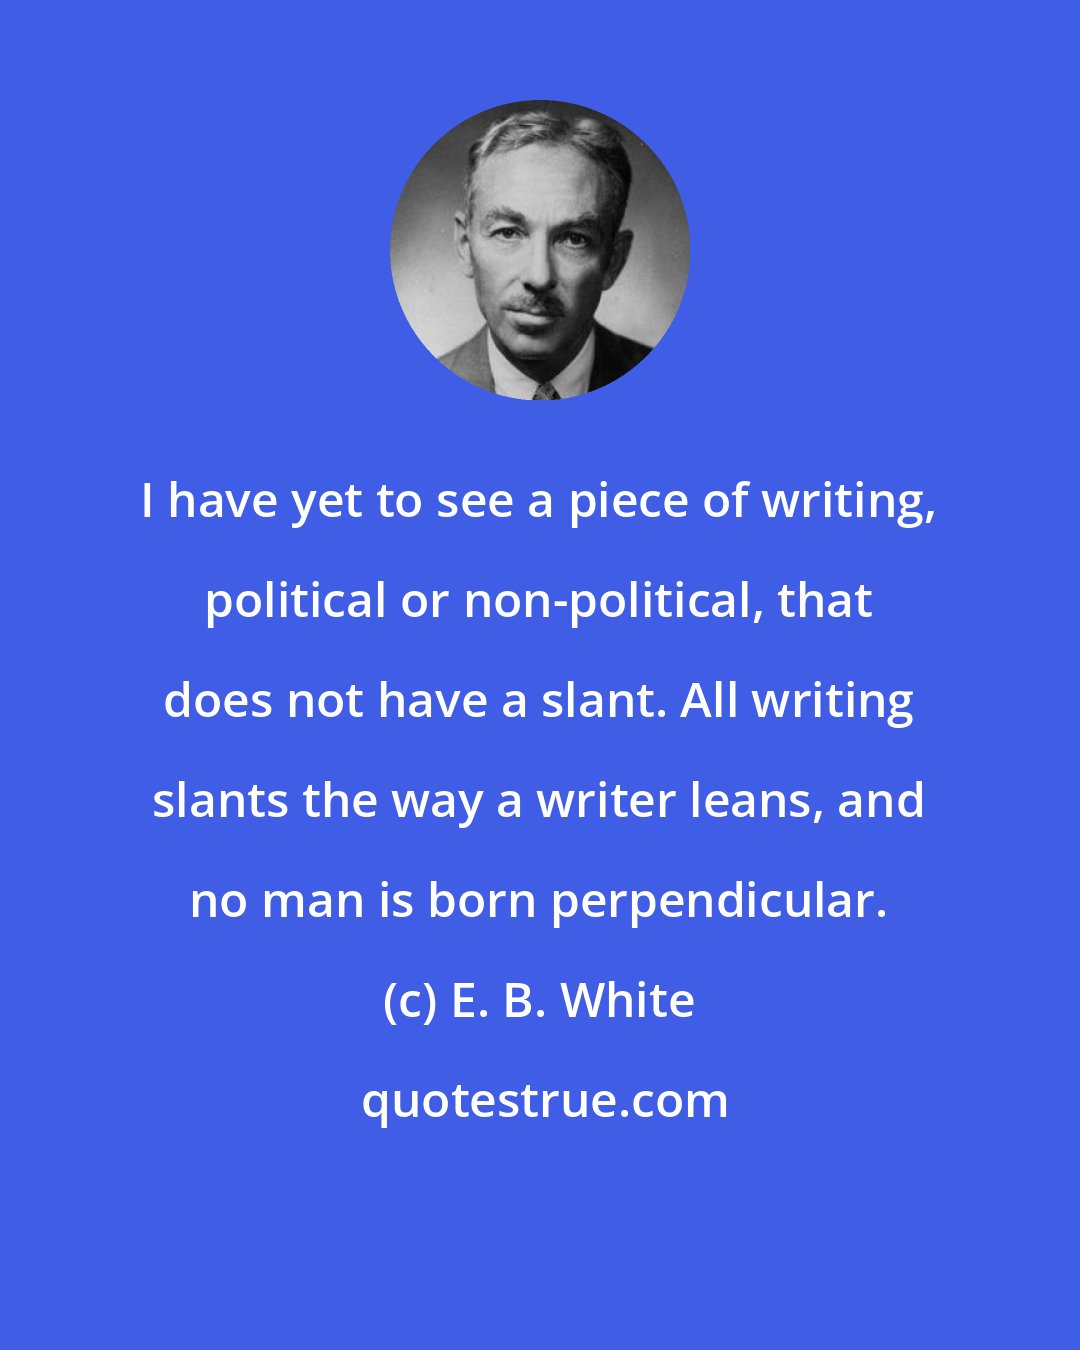 E. B. White: I have yet to see a piece of writing, political or non-political, that does not have a slant. All writing slants the way a writer leans, and no man is born perpendicular.